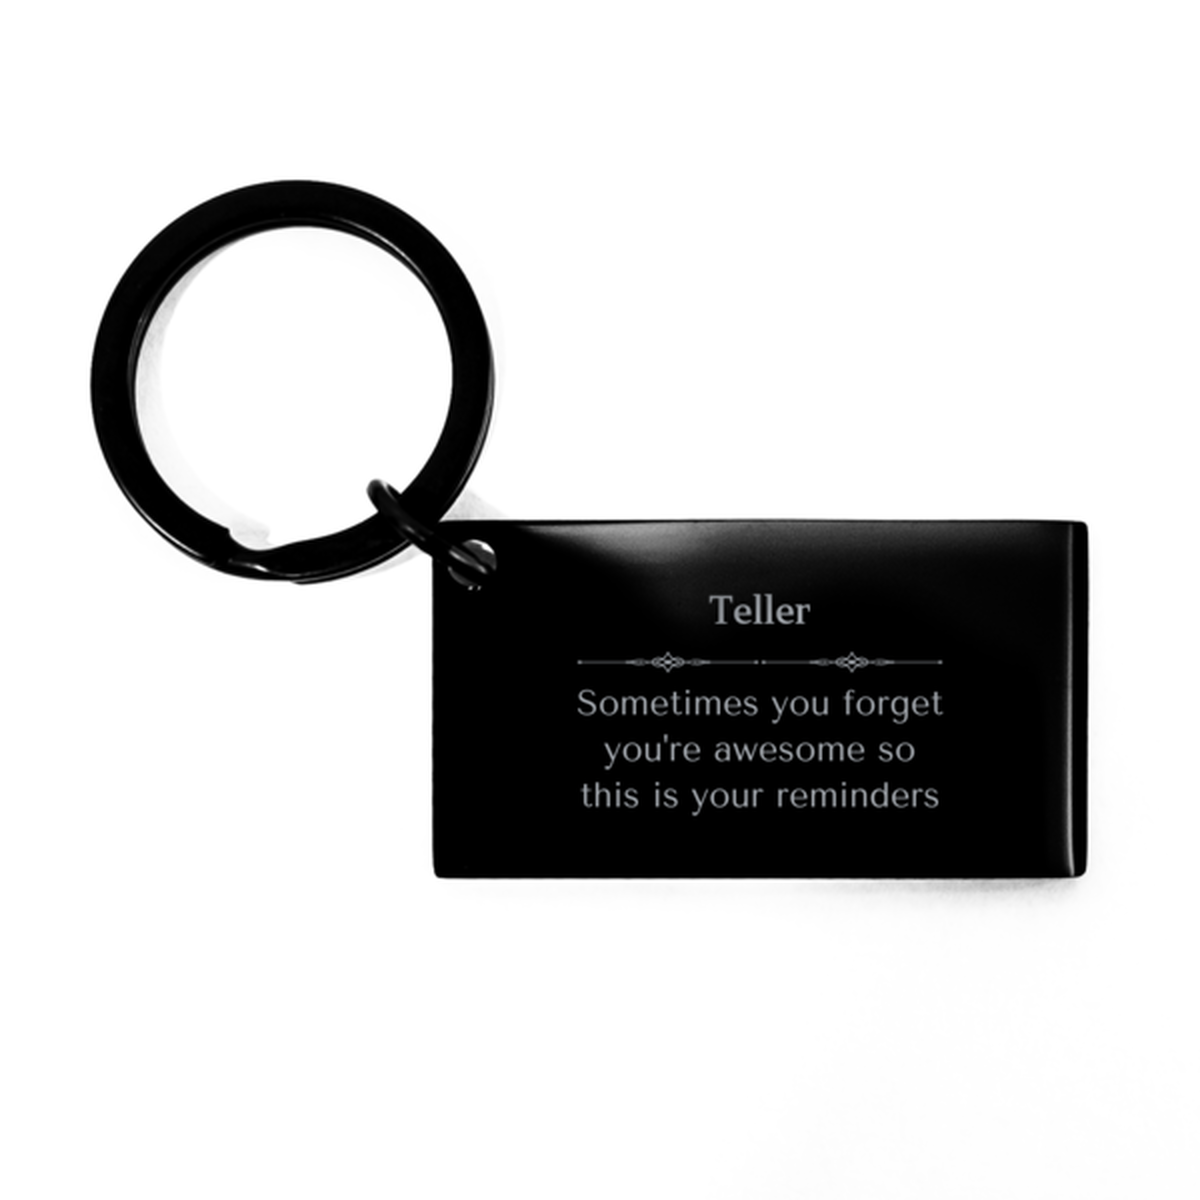 Sentimental Teller Keychain, Yoga Instructor Sometimes you forget you're awesome so this is your reminders, Graduation Christmas Birthday Gifts for Teller, Men, Women, Coworkers